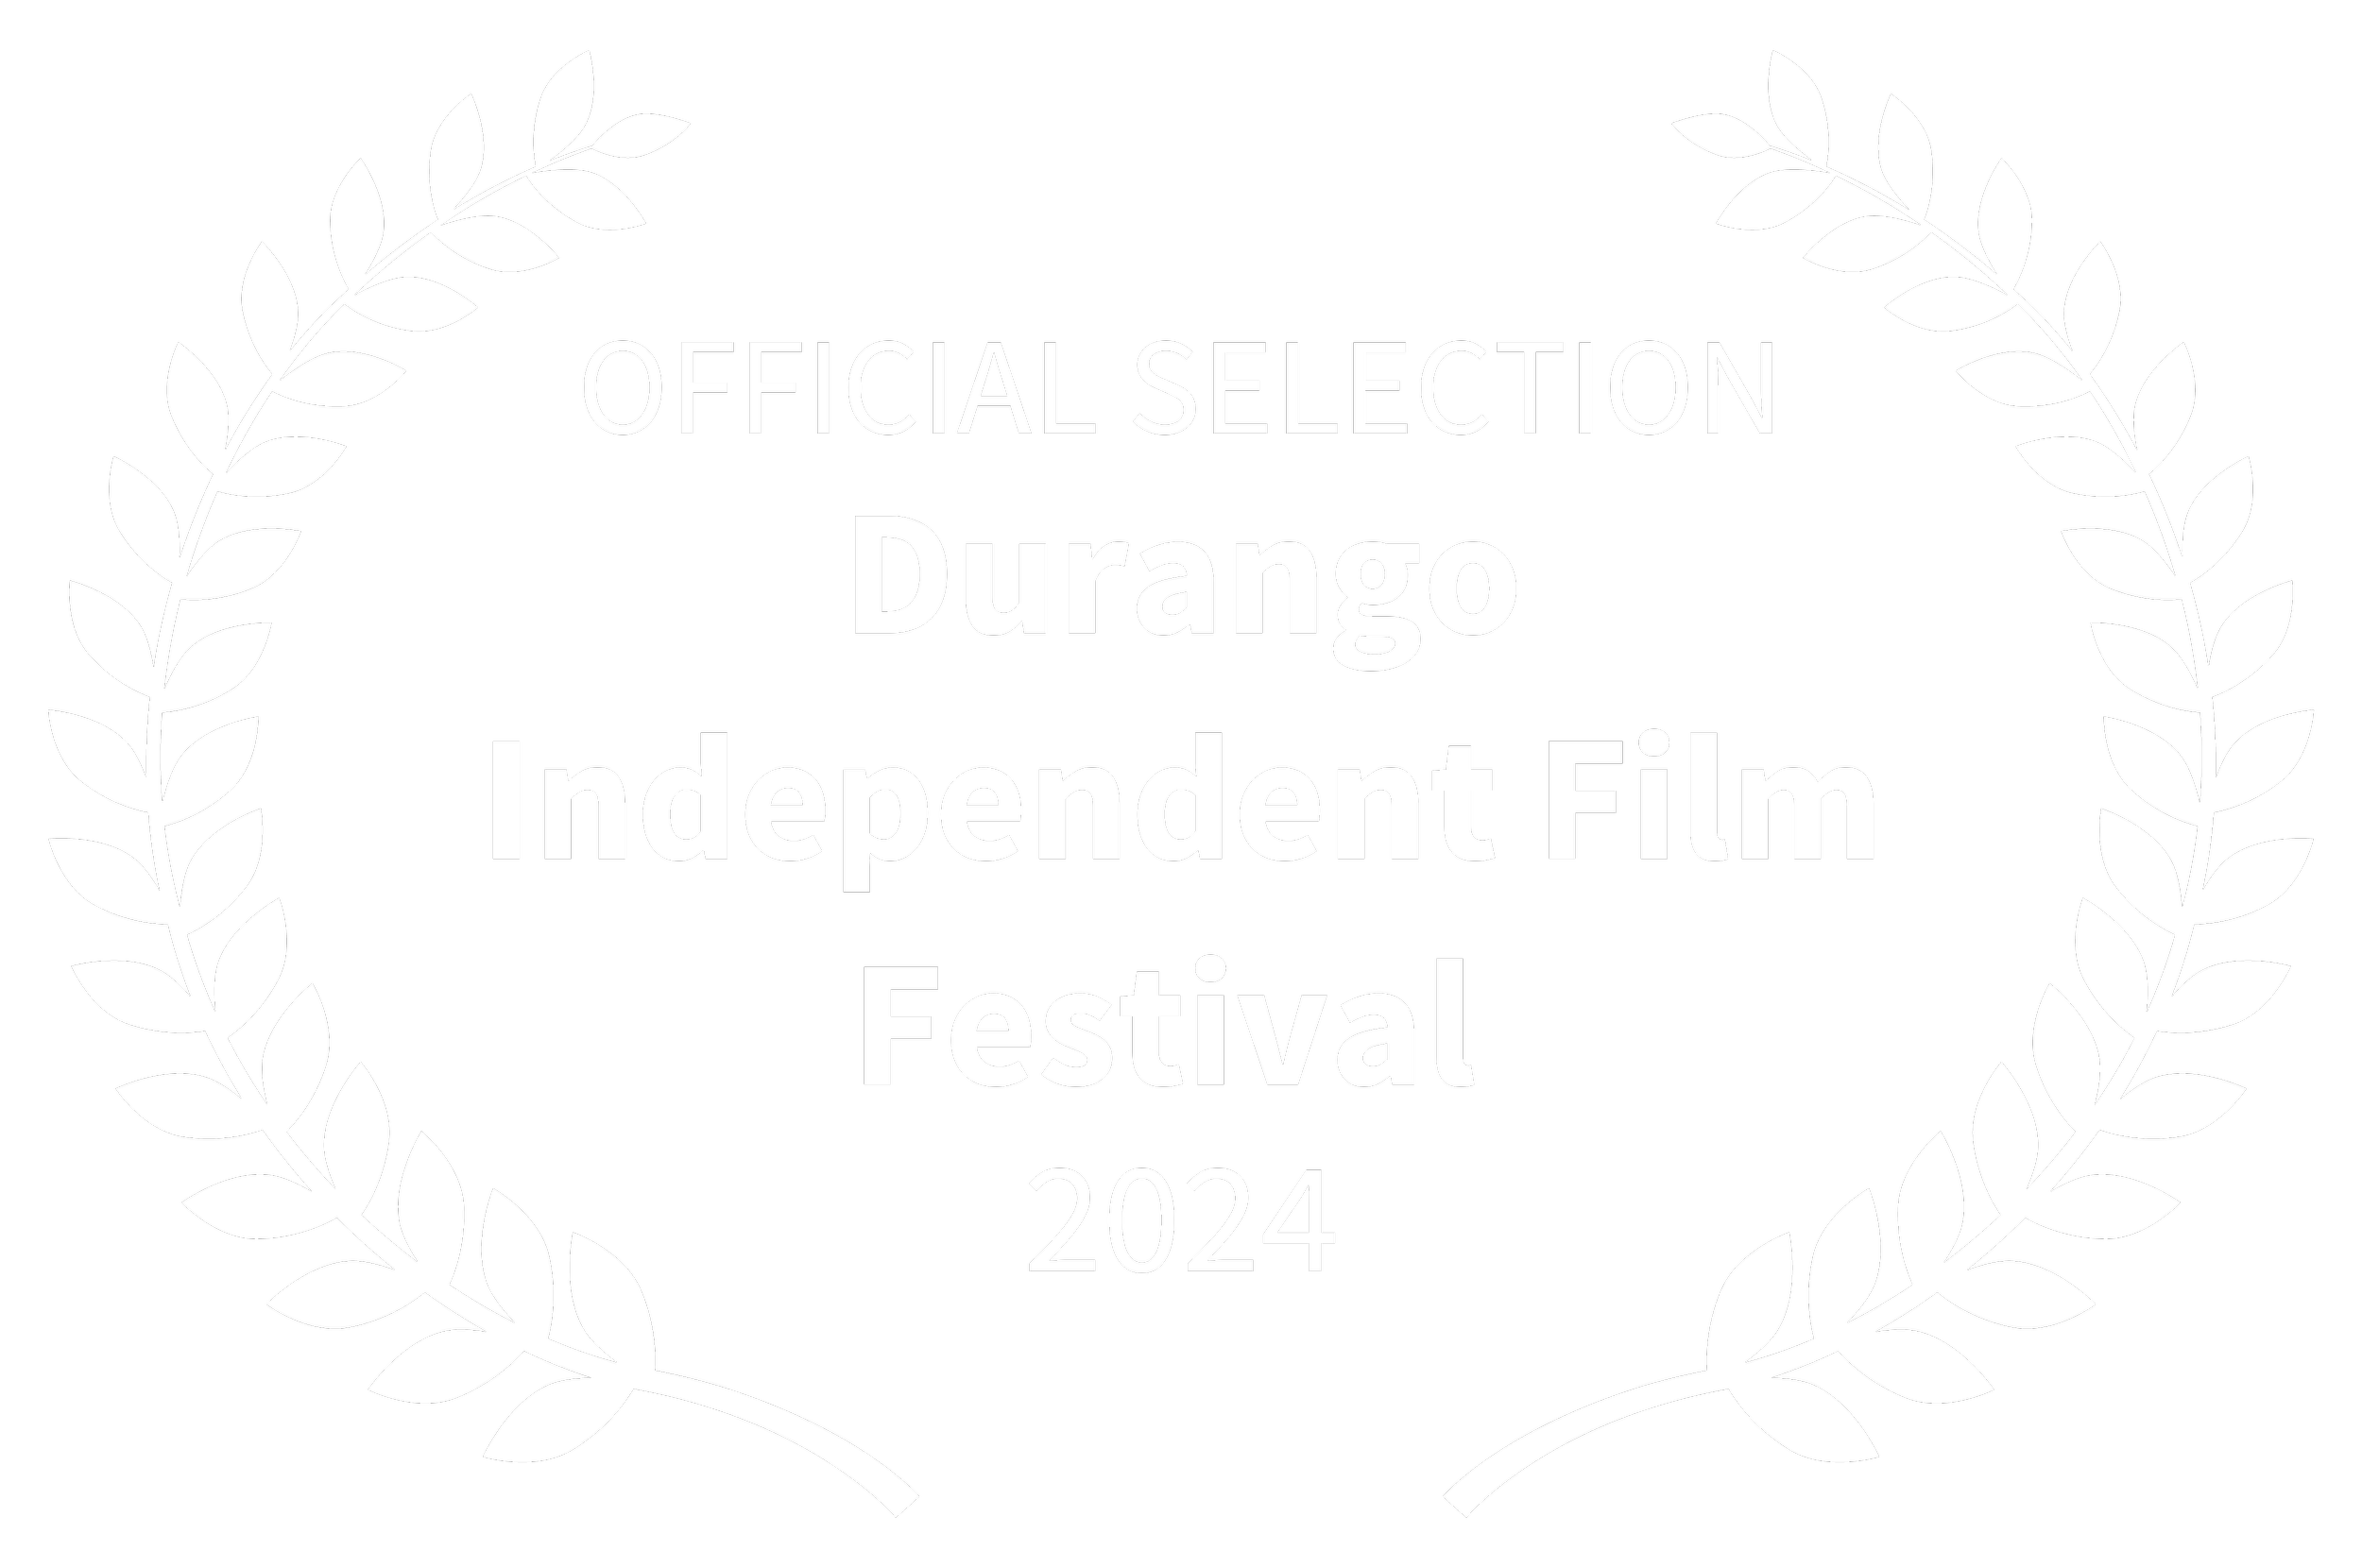 OFFICIALSELECTION-DurangoIndependentFilmFestival-2024.png